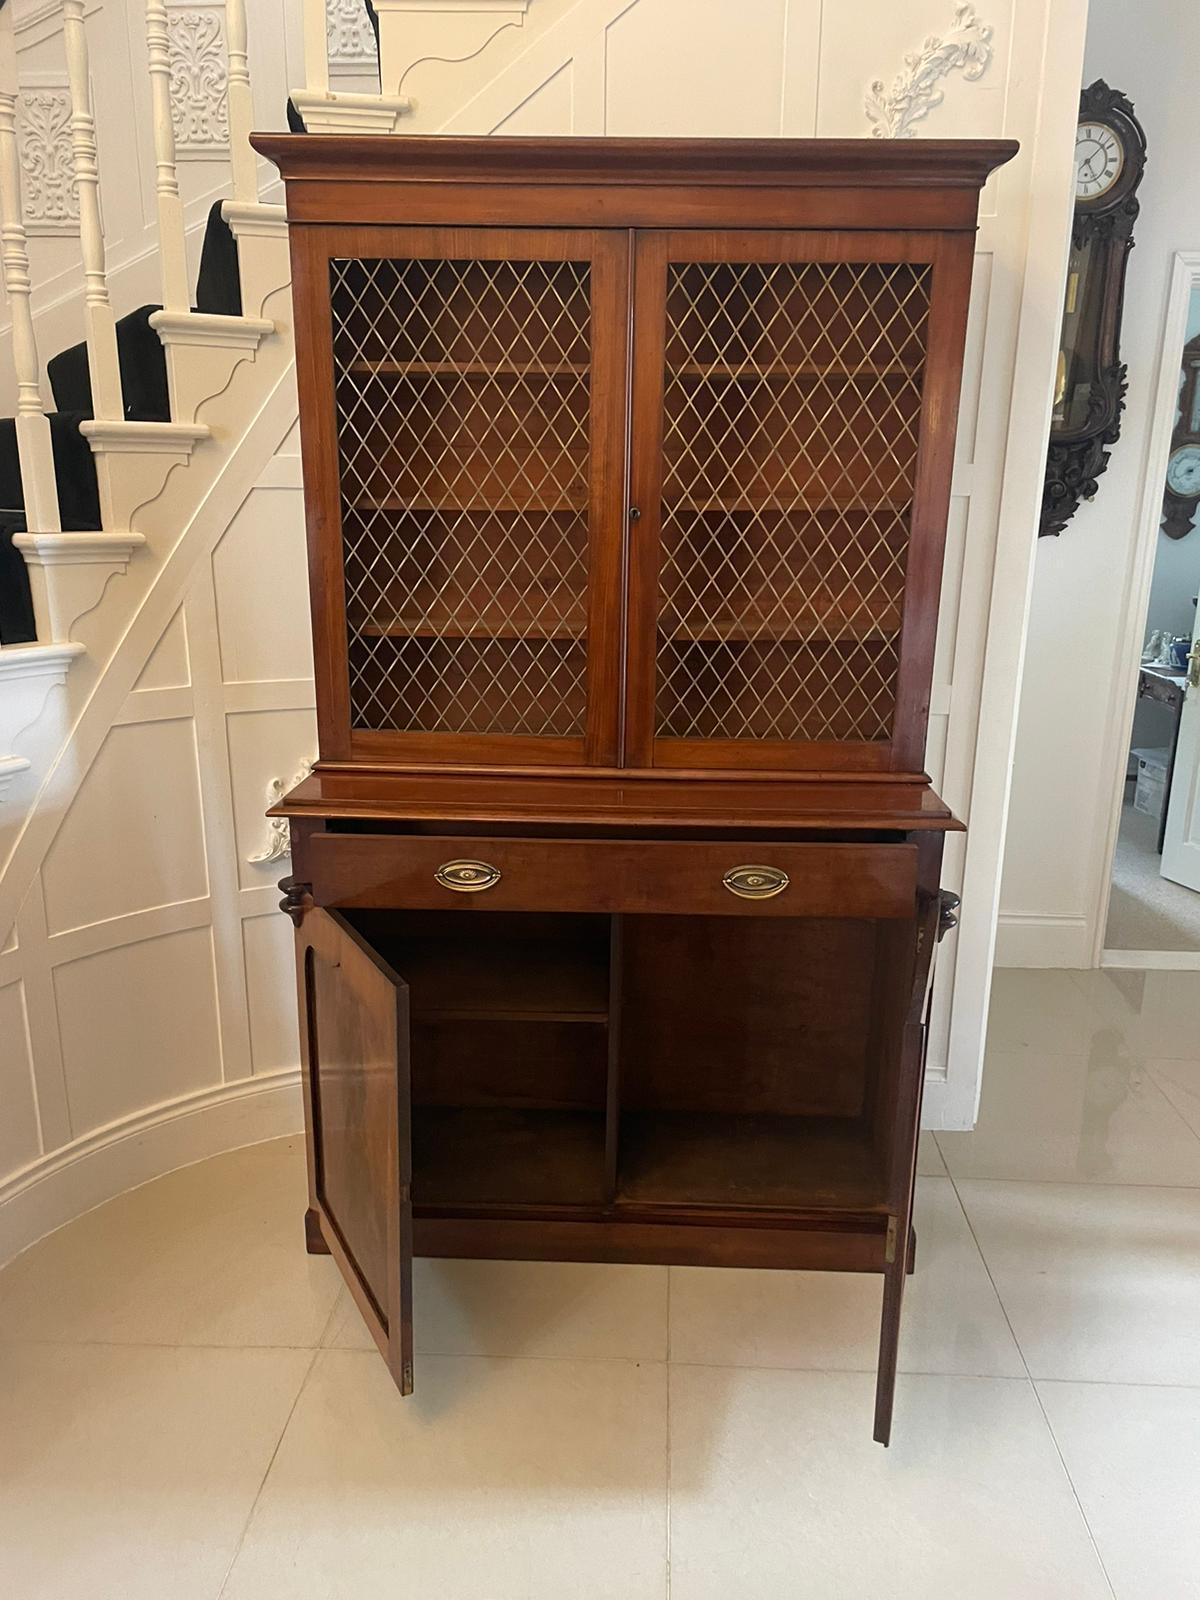 Quality antique William IV mahogany bookcase having a shaped cornice to the upper section over a pair of mahogany doors with brass grilles opening to reveal an interior with three adjustable shelves The base having one long drawer with brass handles